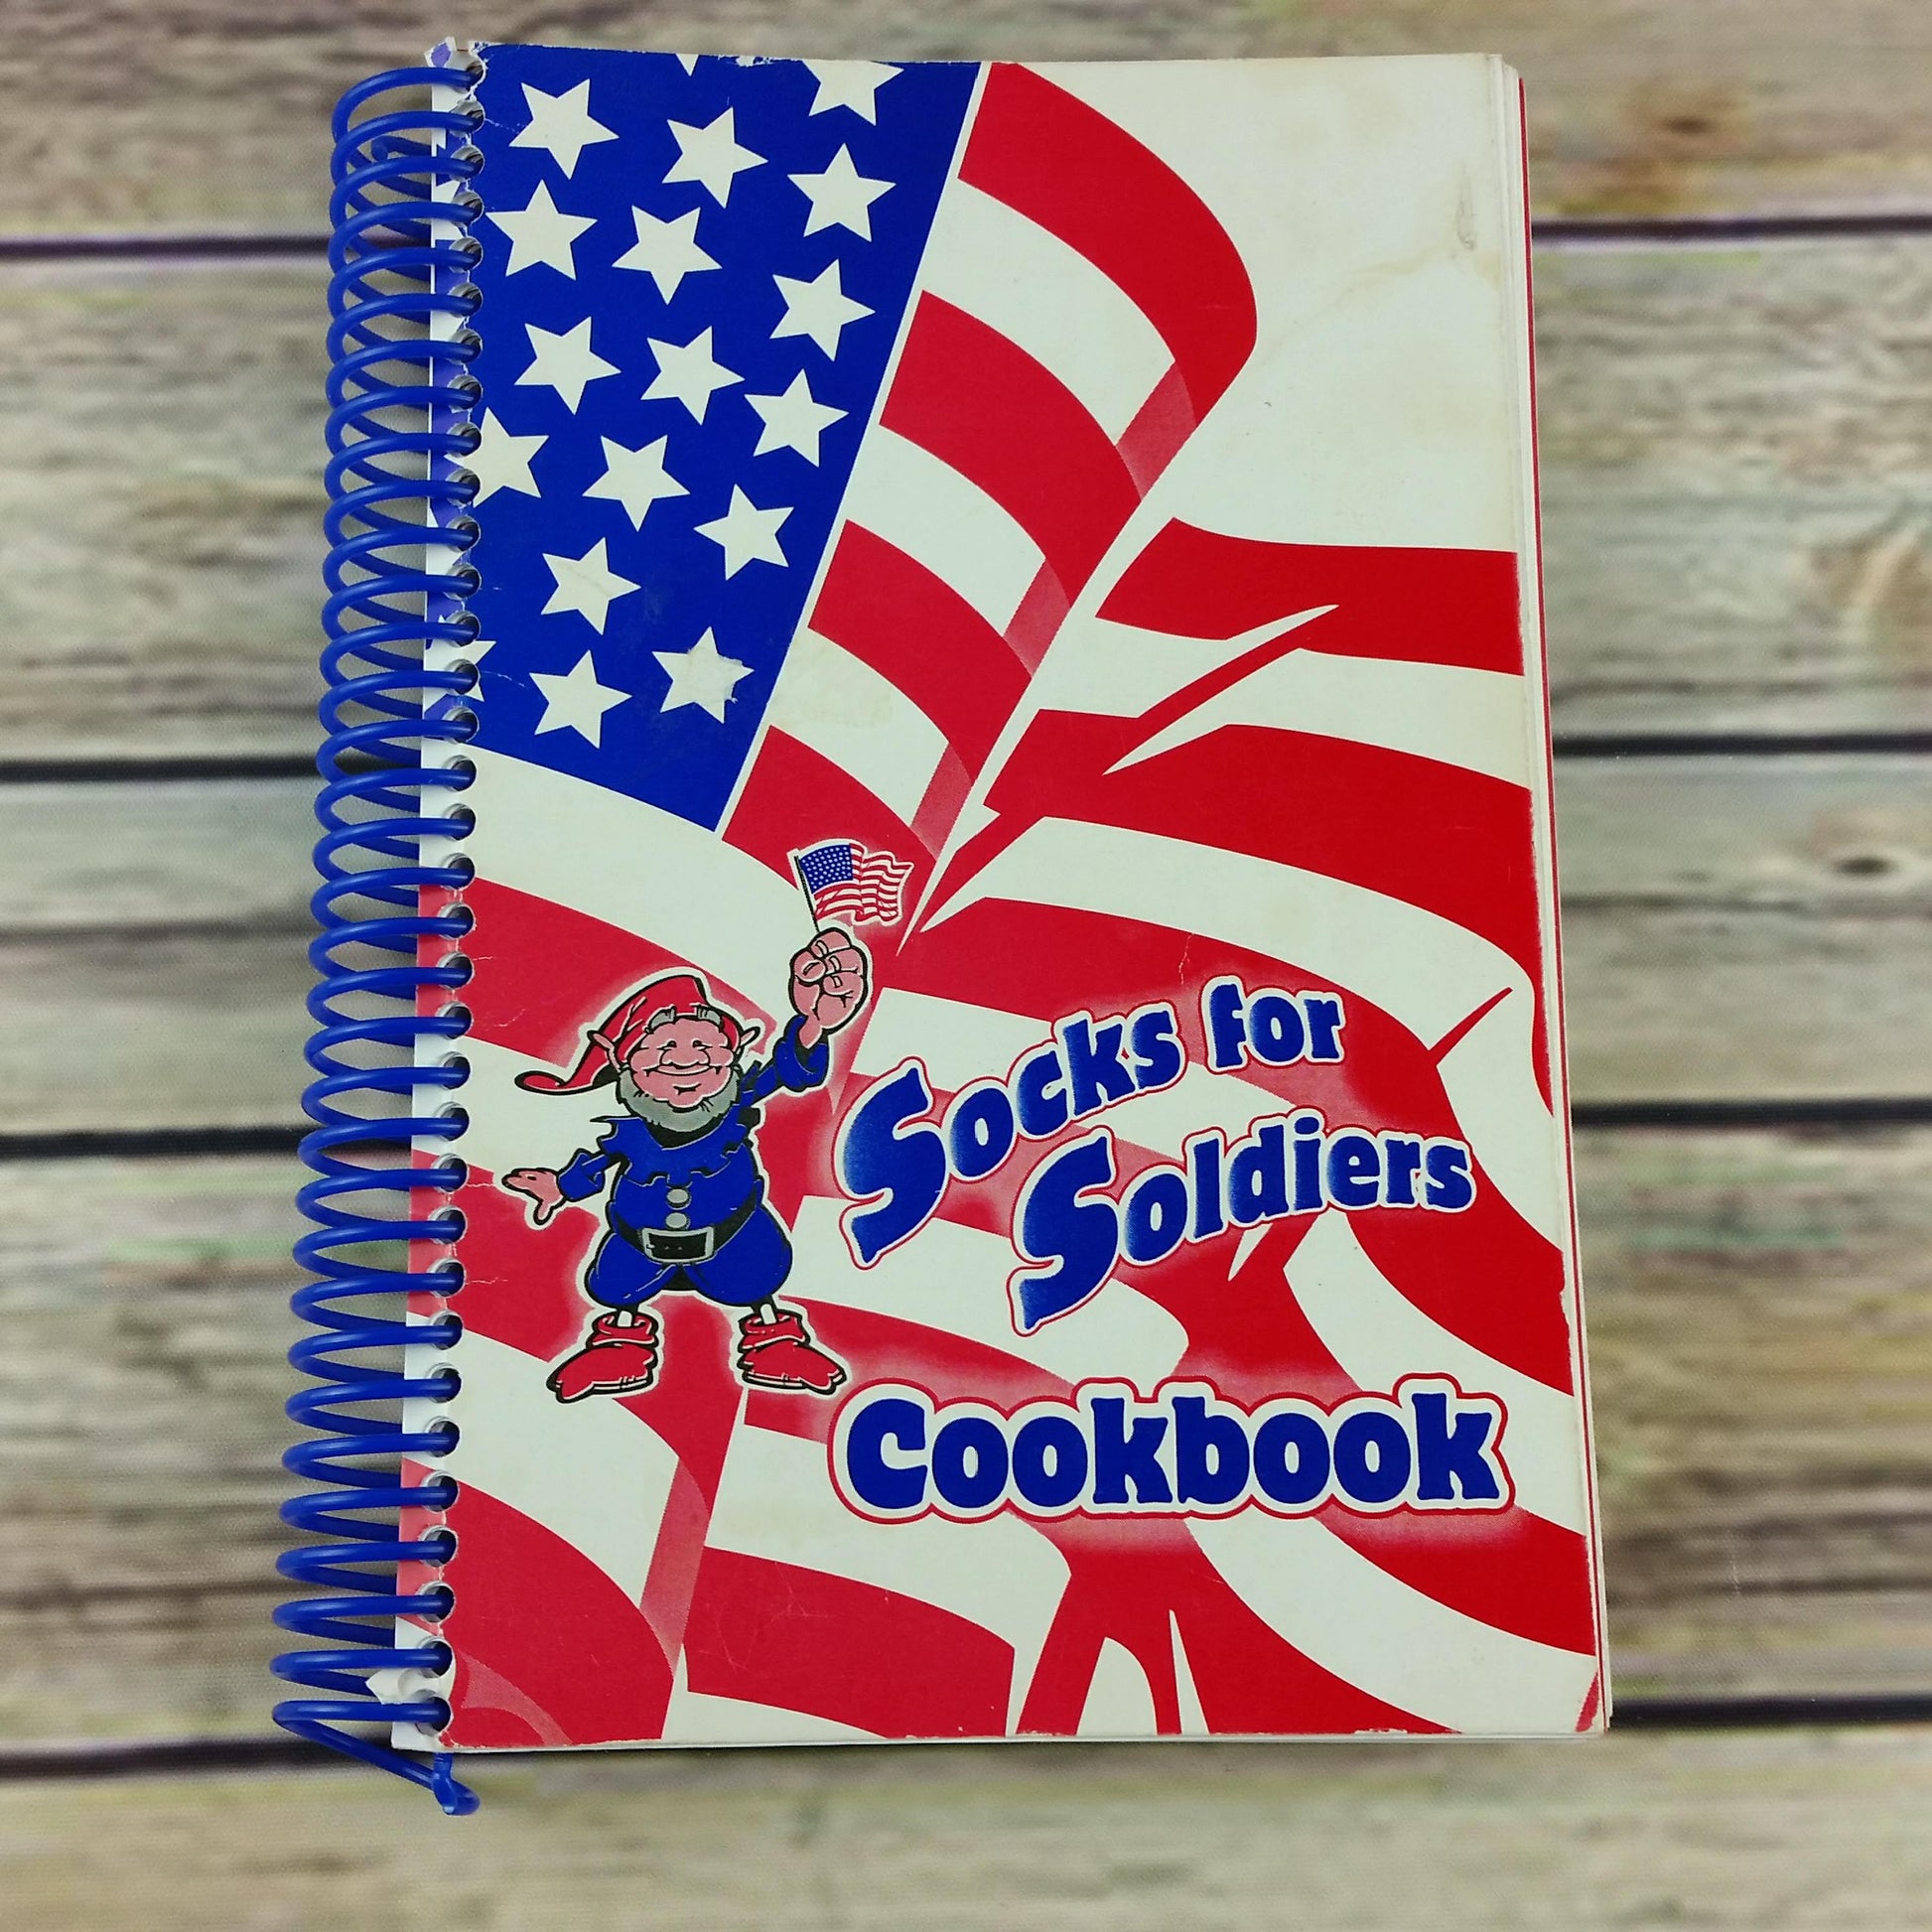 Socks For Soldiers Cookbook Book 1 USA Military Support our Troops 2005 Spiral - At Grandma's Table